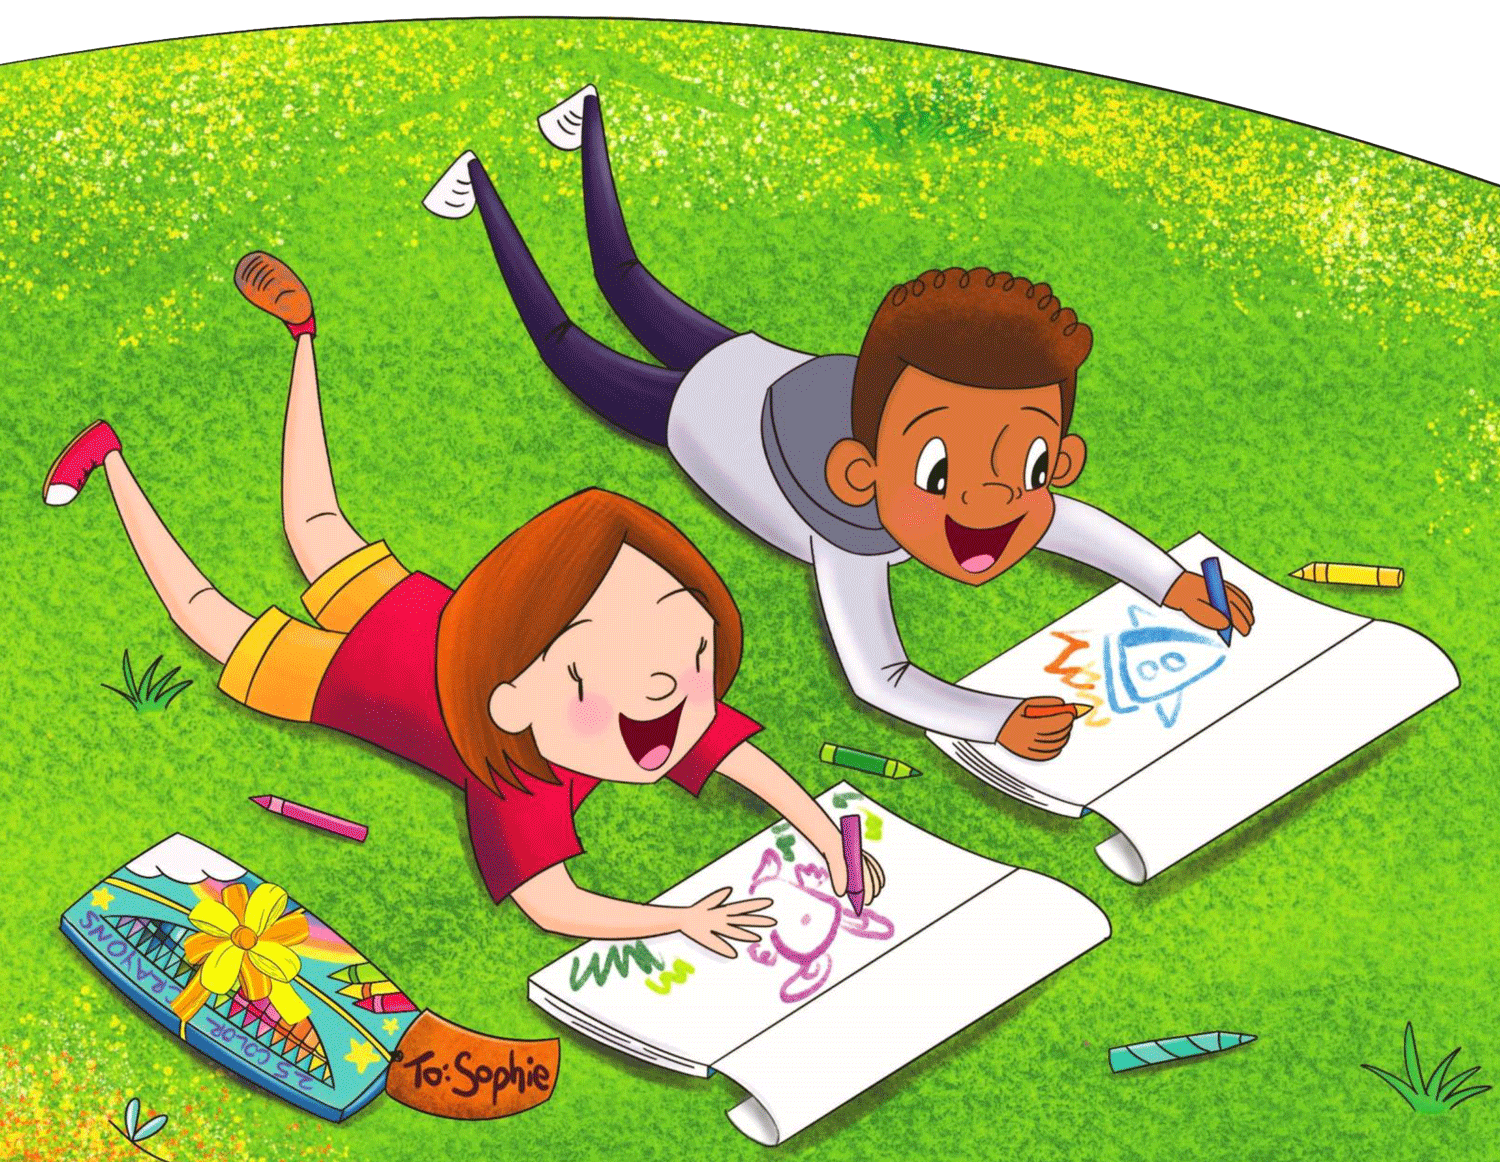 Illustration of Sophie and her friend, both lying on their stomachs in the grass drawing using Sophie's new art supplies.